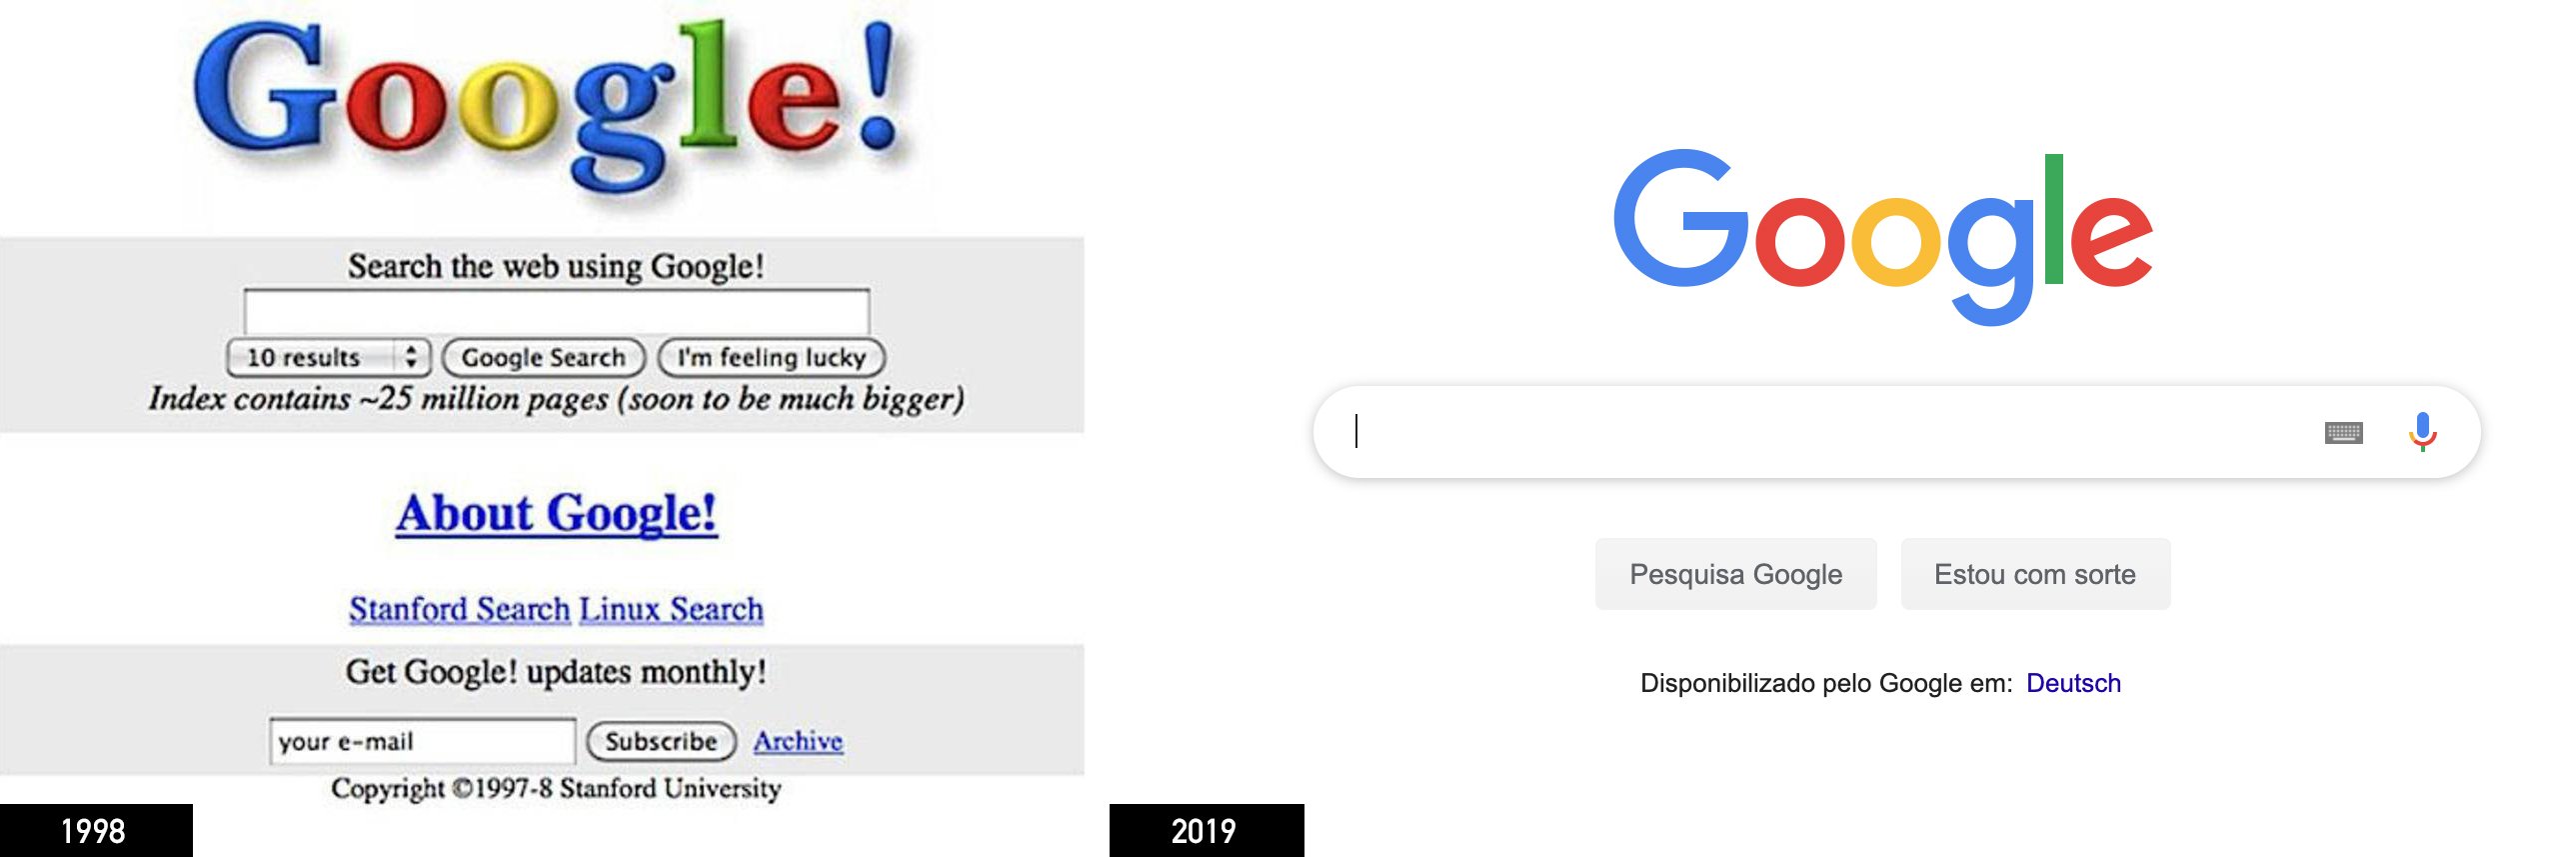 Google in 1998 and in 2019